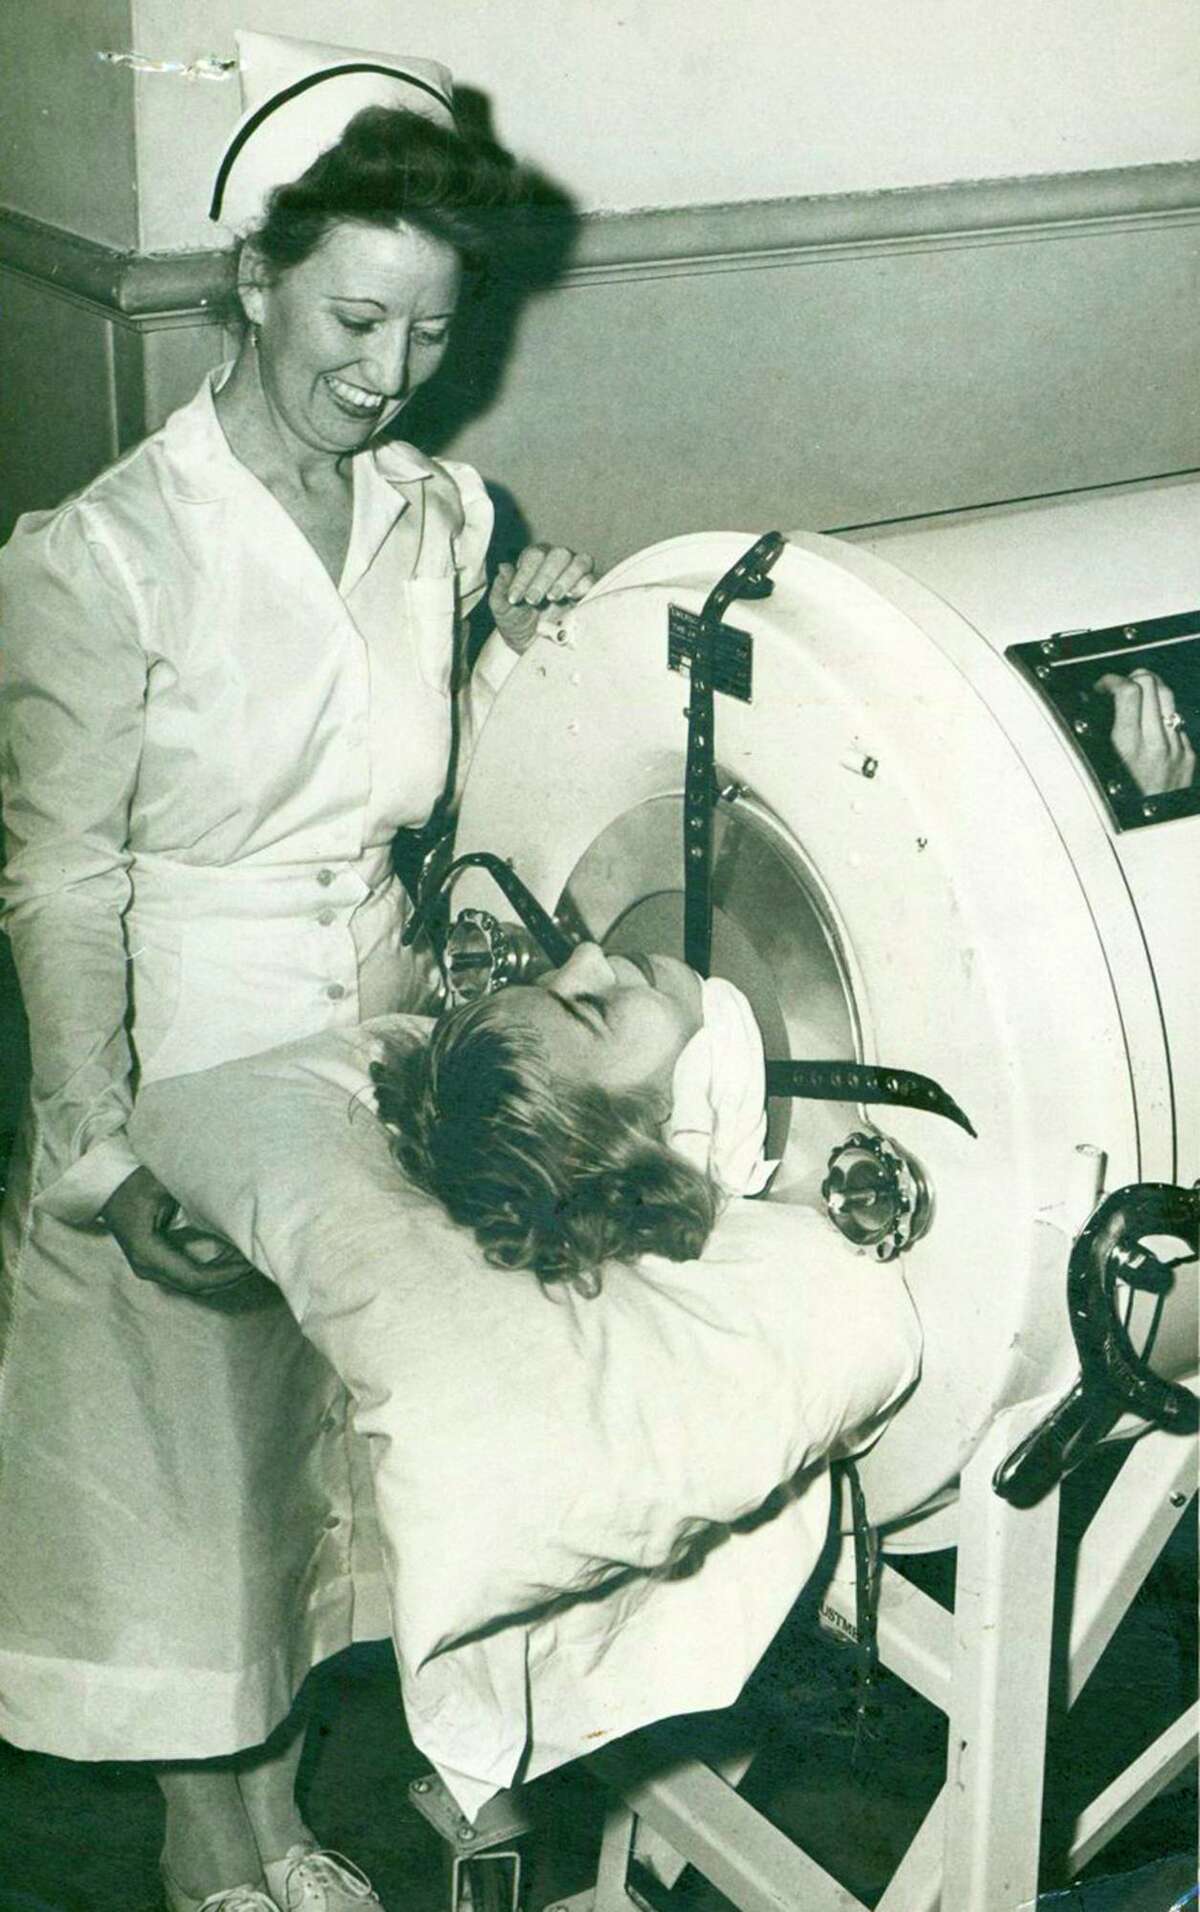 Della Barron, 17-year-old polio patient, spent nearly two weeks in one of the Robert B. Green Hospital's iron lungs in 1948. At her side is Supervisor Josephine Ricks. The iron lung helped victims of the potentially deadly virus breathe.